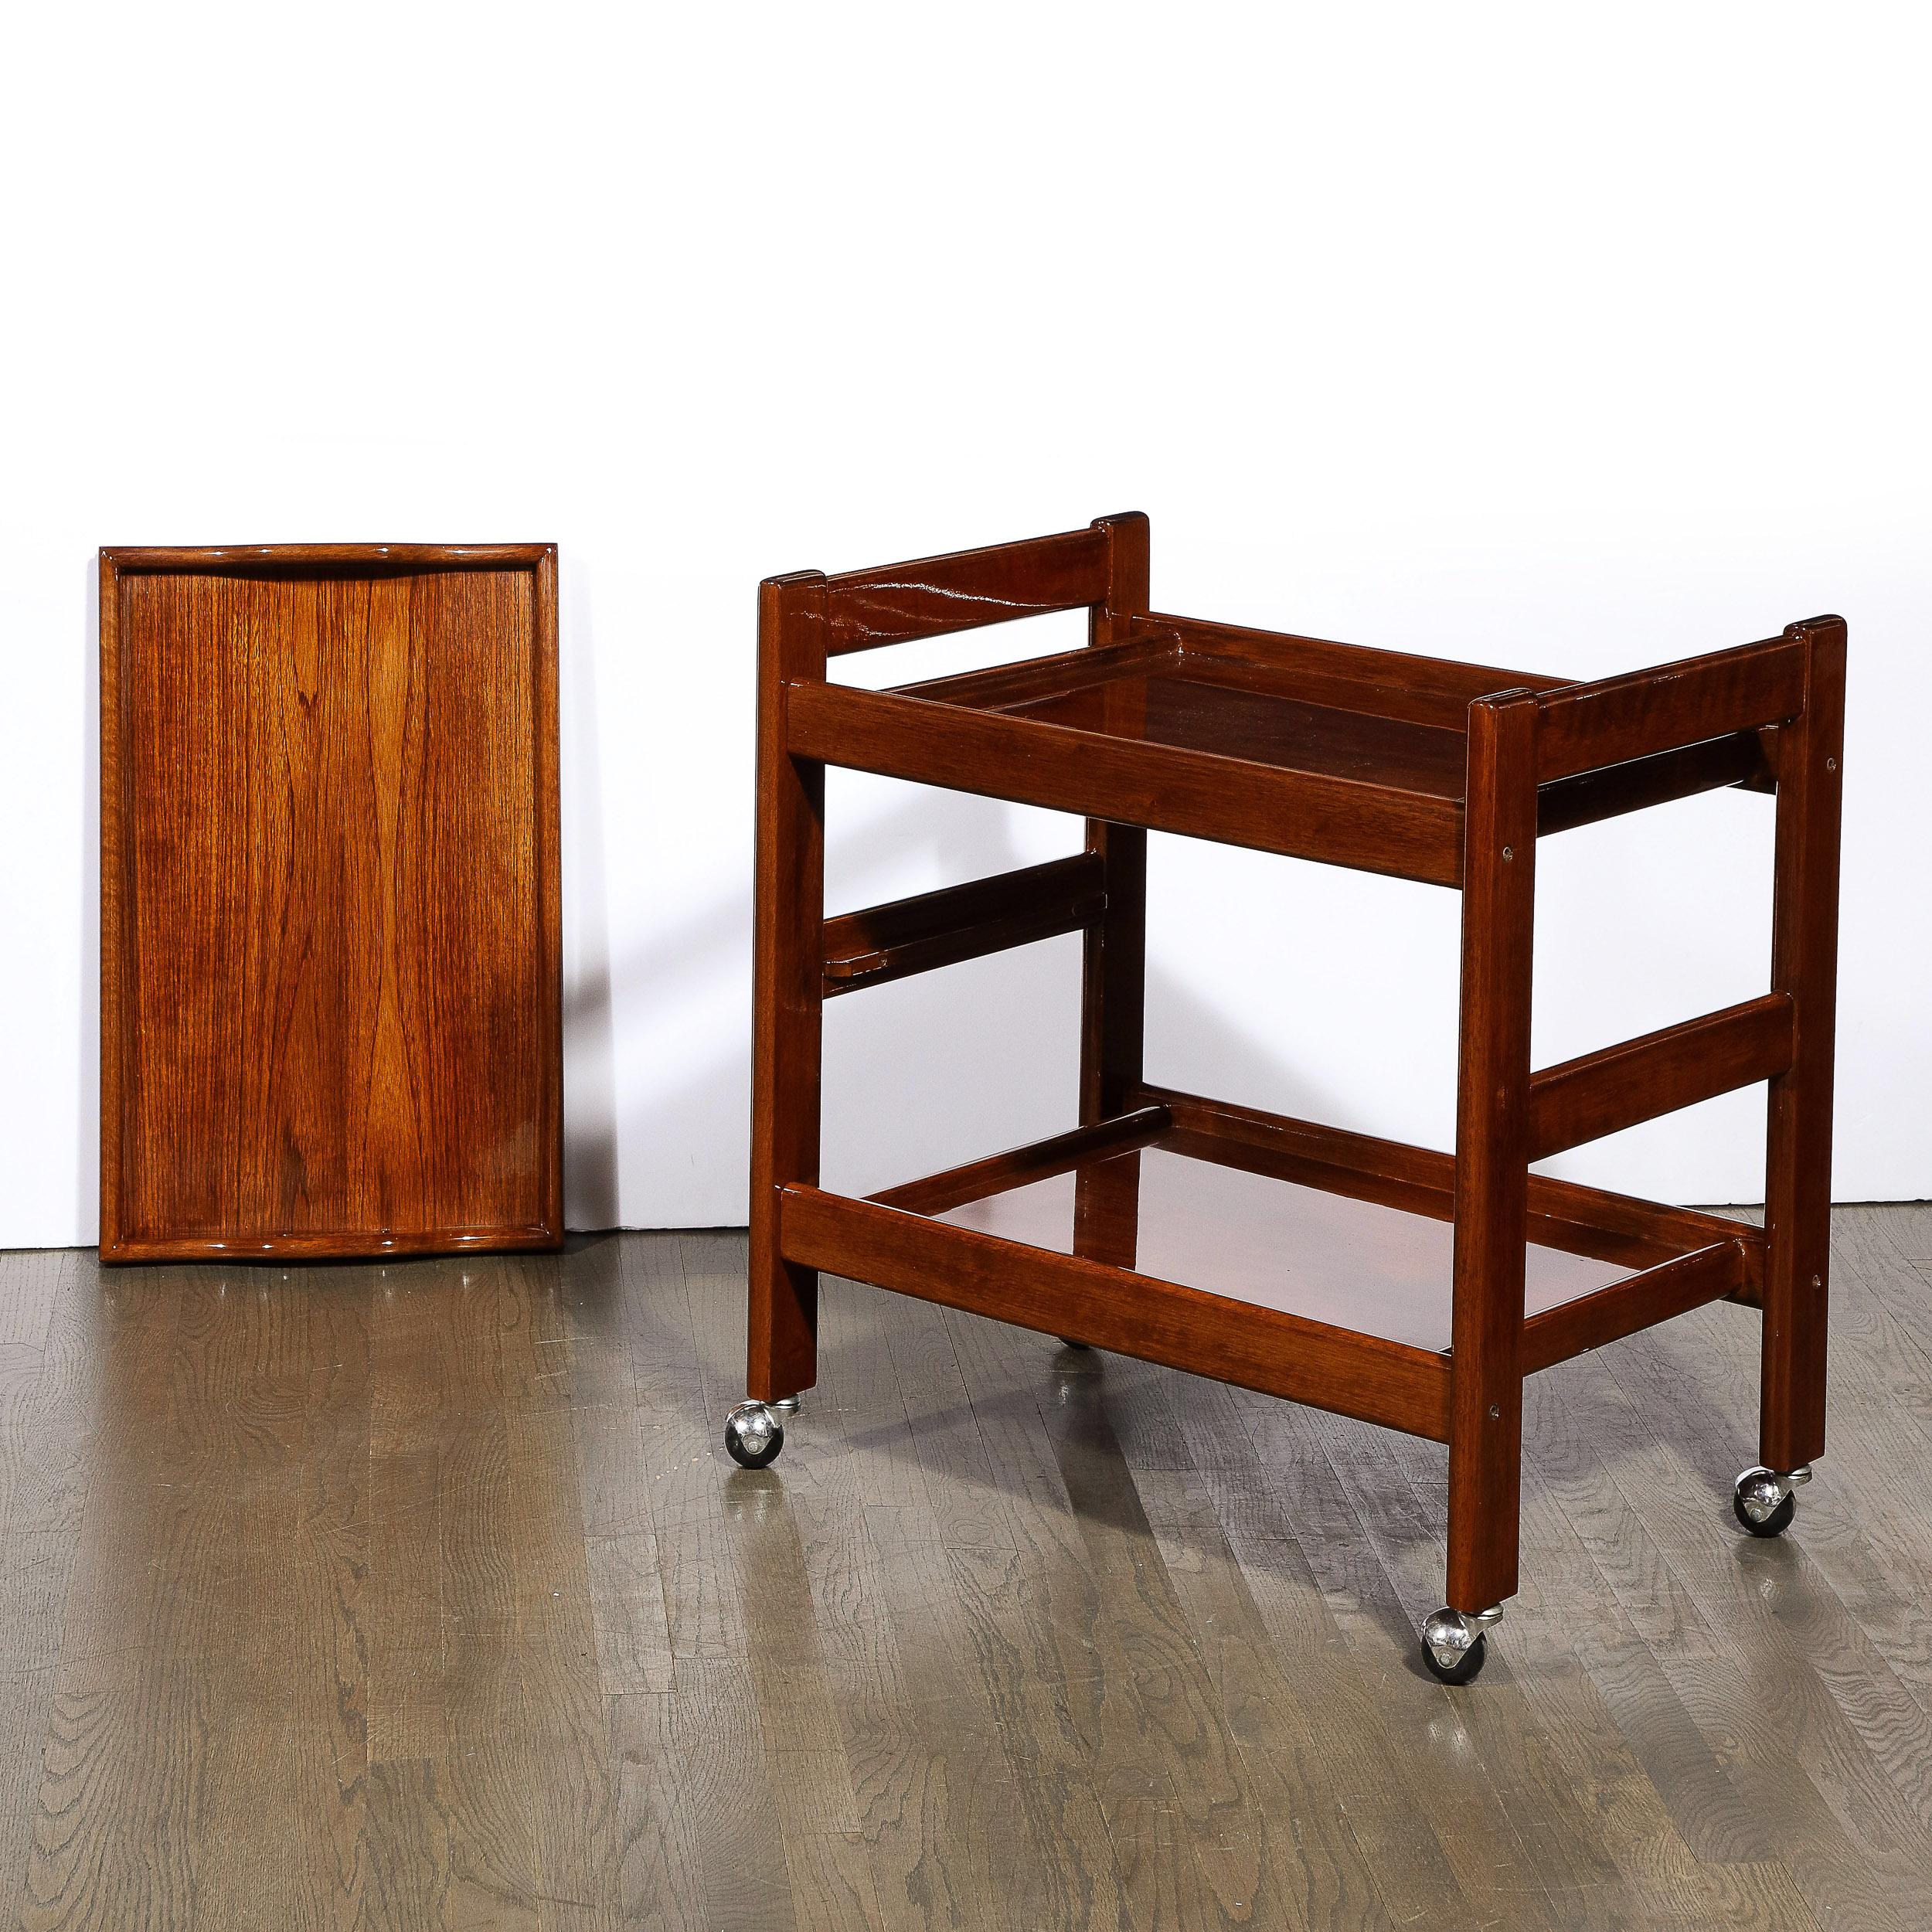 1960s Mid-Century Modern Three-Tier Bar Cart on Castors in Book-Matched Walnut  For Sale 3